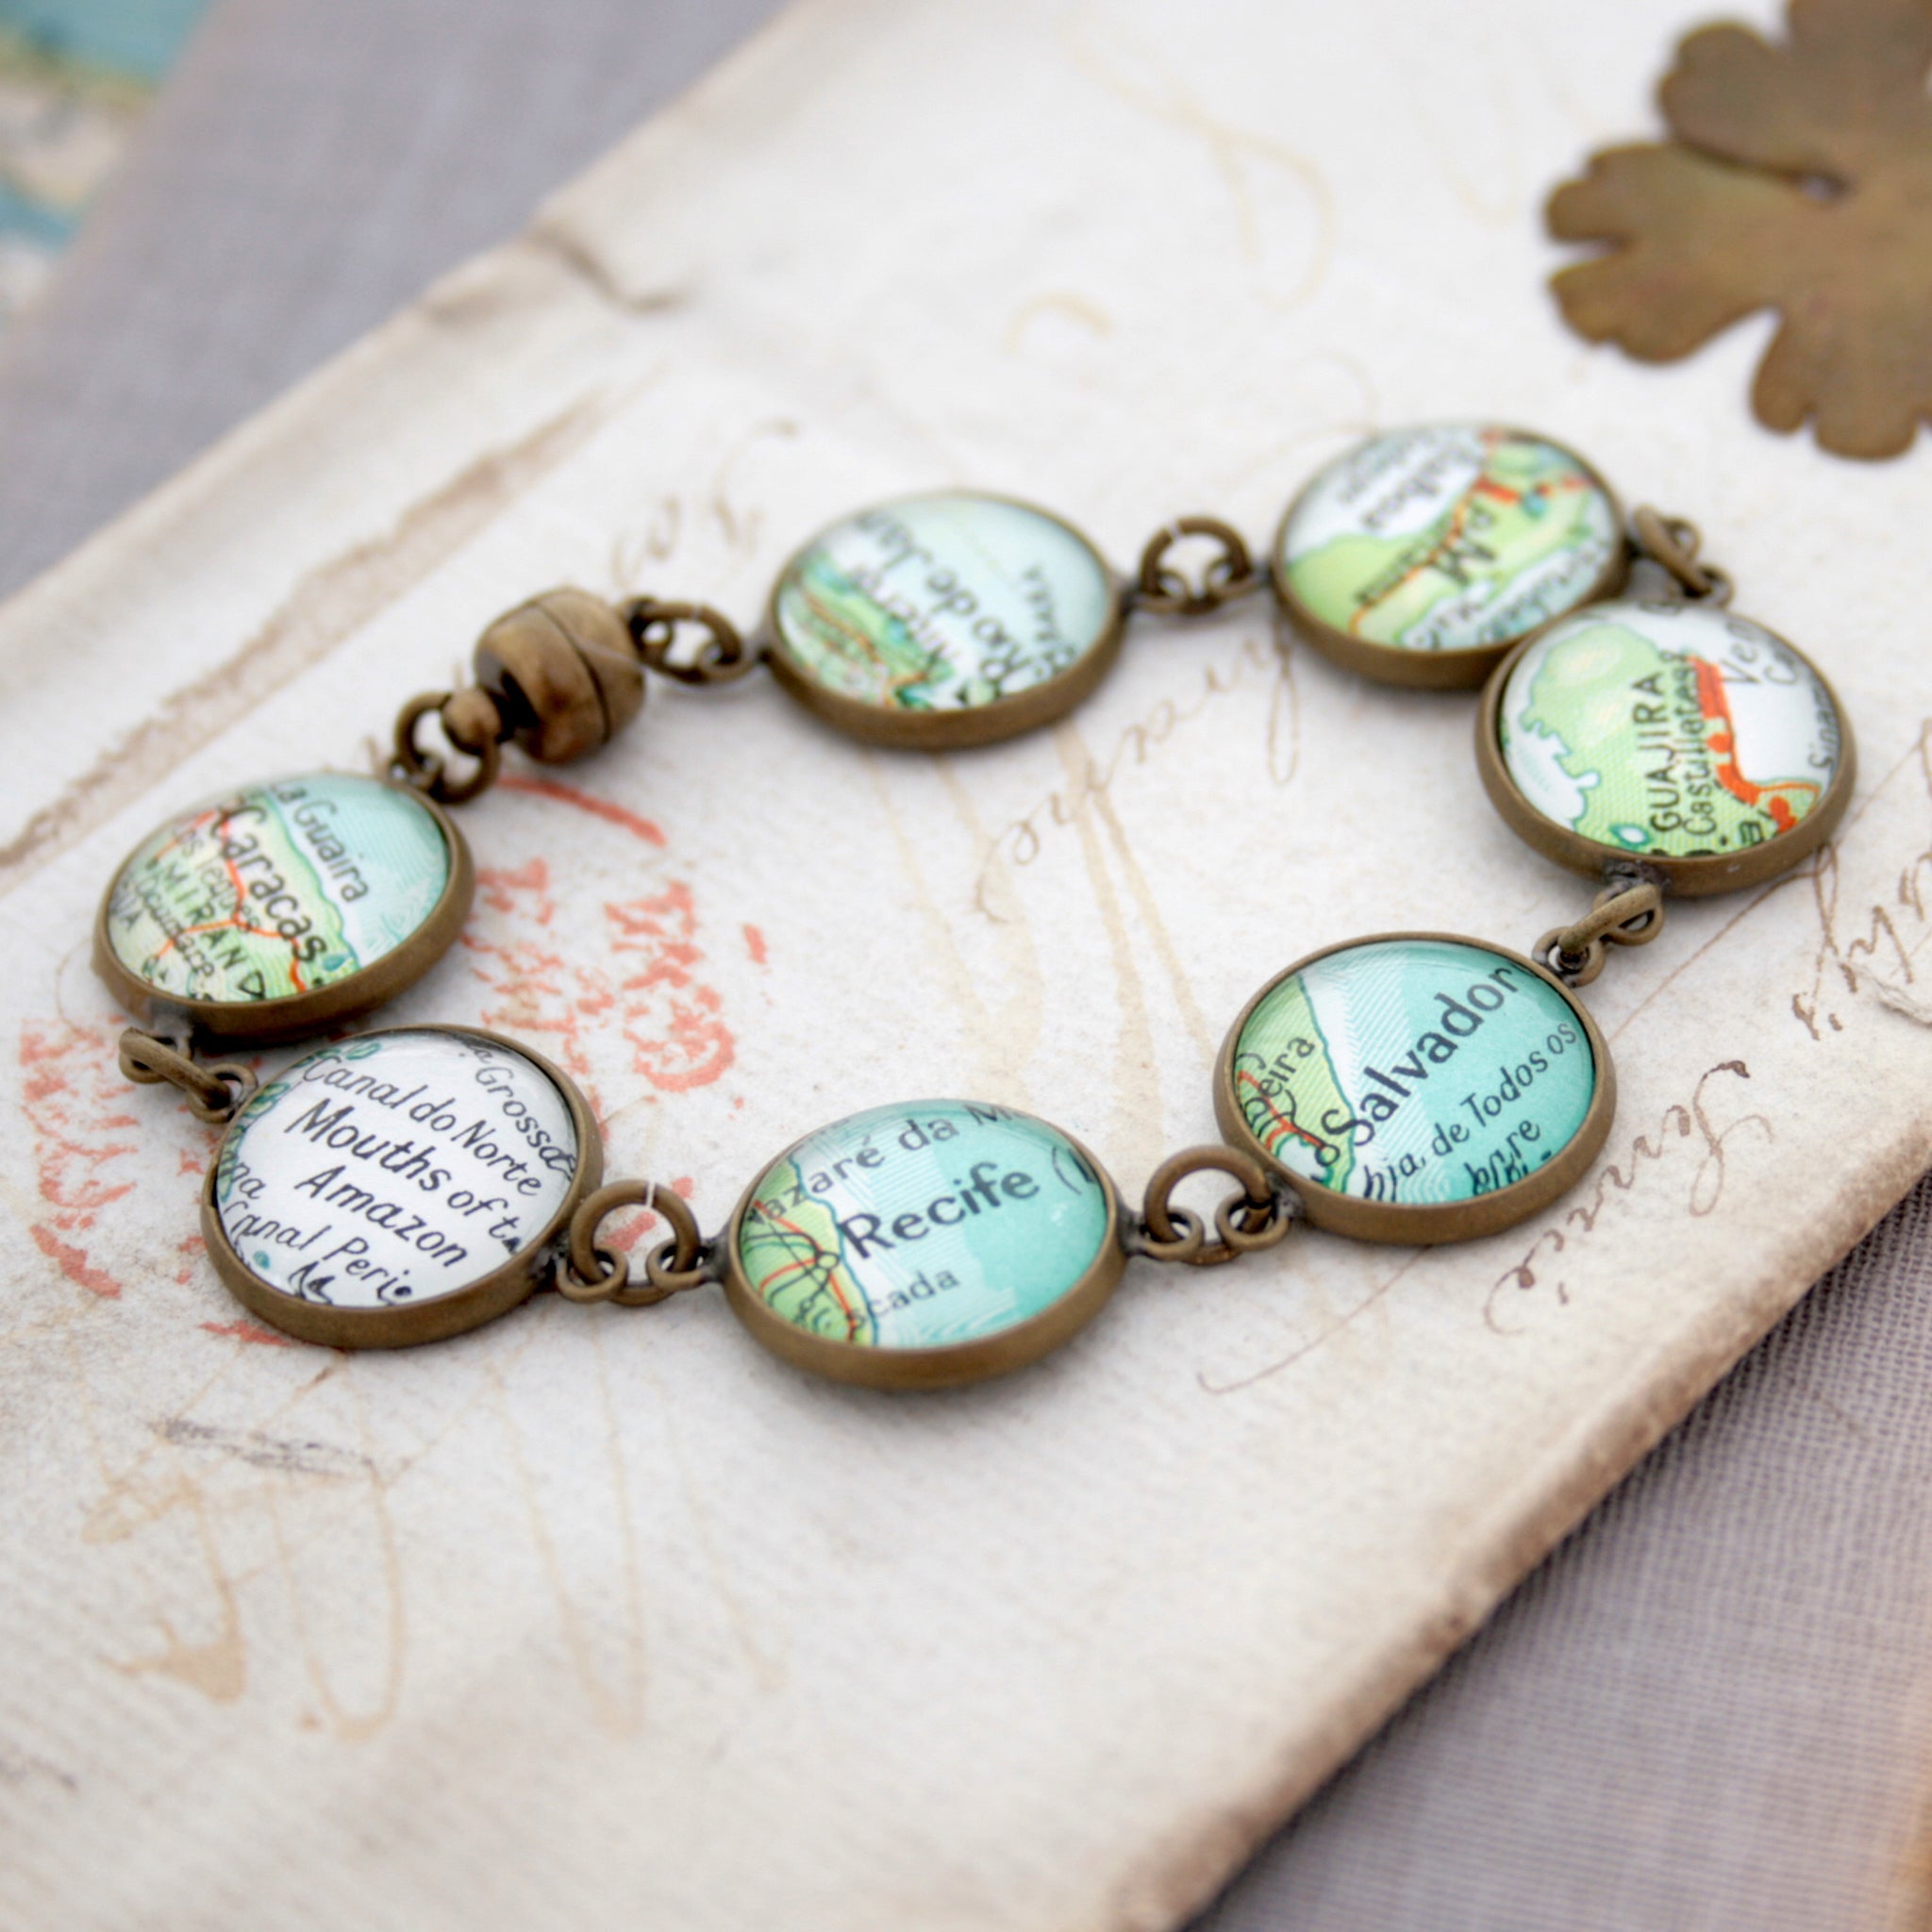 Antique bronze beaded bracelet featuring different map locations